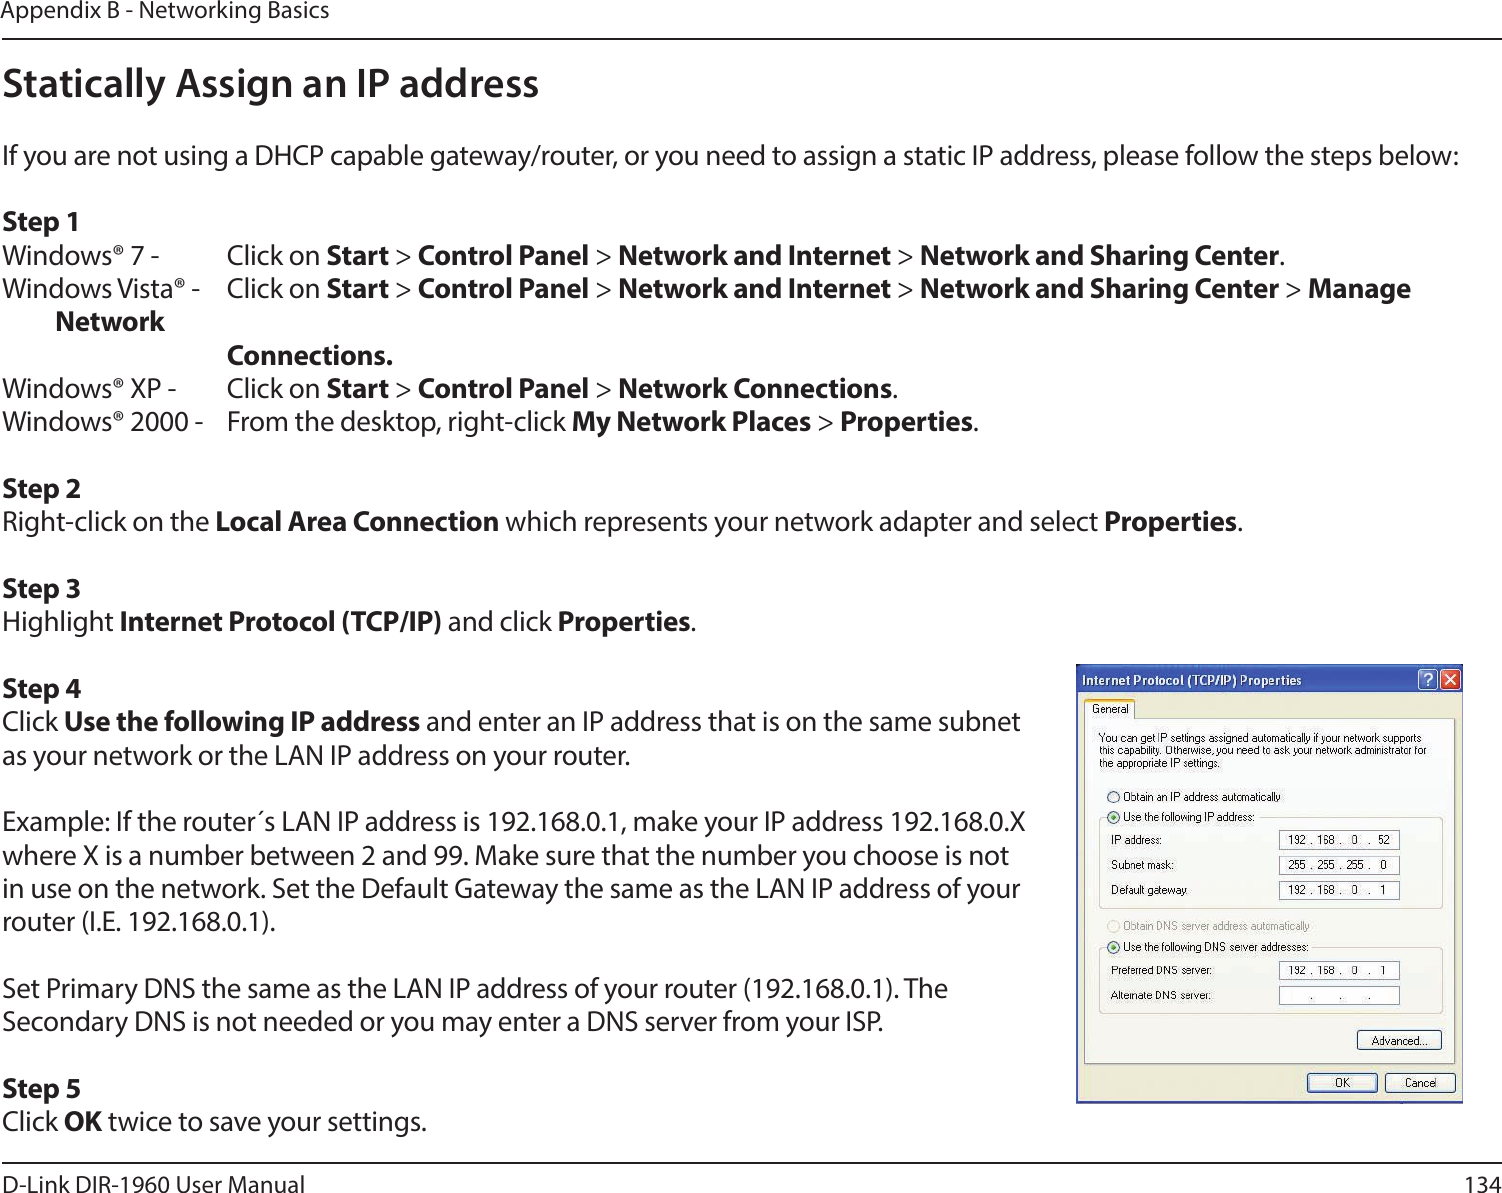 134D-Link DIR-1960 User ManualAppendix B - Networking BasicsStatically Assign an IP addressIf you are not using a DHCP capable gateway/router, or you need to assign a static IP address, please follow the steps below:Step 1Windows® 7 -  Click on Start &gt; Control Panel &gt; Network and Internet &gt; Network and Sharing Center.Windows Vista® -  Click on Start &gt; Control Panel &gt; Network and Internet &gt; Network and Sharing Center &gt; Manage Network    Connections.Windows® XP -  Click on Start &gt; Control Panel &gt; Network Connections.Windows® 2000 -  From the desktop, right-click My Network Places &gt; Properties.Step 2Right-click on the Local Area Connection which represents your network adapter and select Properties.Step 3Highlight Internet Protocol (TCP/IP) and click Properties.Step 4Click Use the following IP address and enter an IP address that is on the same subnet as your network or the LAN IP address on your router. Example: If the router´s LAN IP address is 192.168.0.1, make your IP address 192.168.0.X where X is a number between 2 and 99. Make sure that the number you choose is not in use on the network. Set the Default Gateway the same as the LAN IP address of your router (I.E. 192.168.0.1). Set Primary DNS the same as the LAN IP address of your router (192.168.0.1). The Secondary DNS is not needed or you may enter a DNS server from your ISP.Step 5Click OK twice to save your settings.